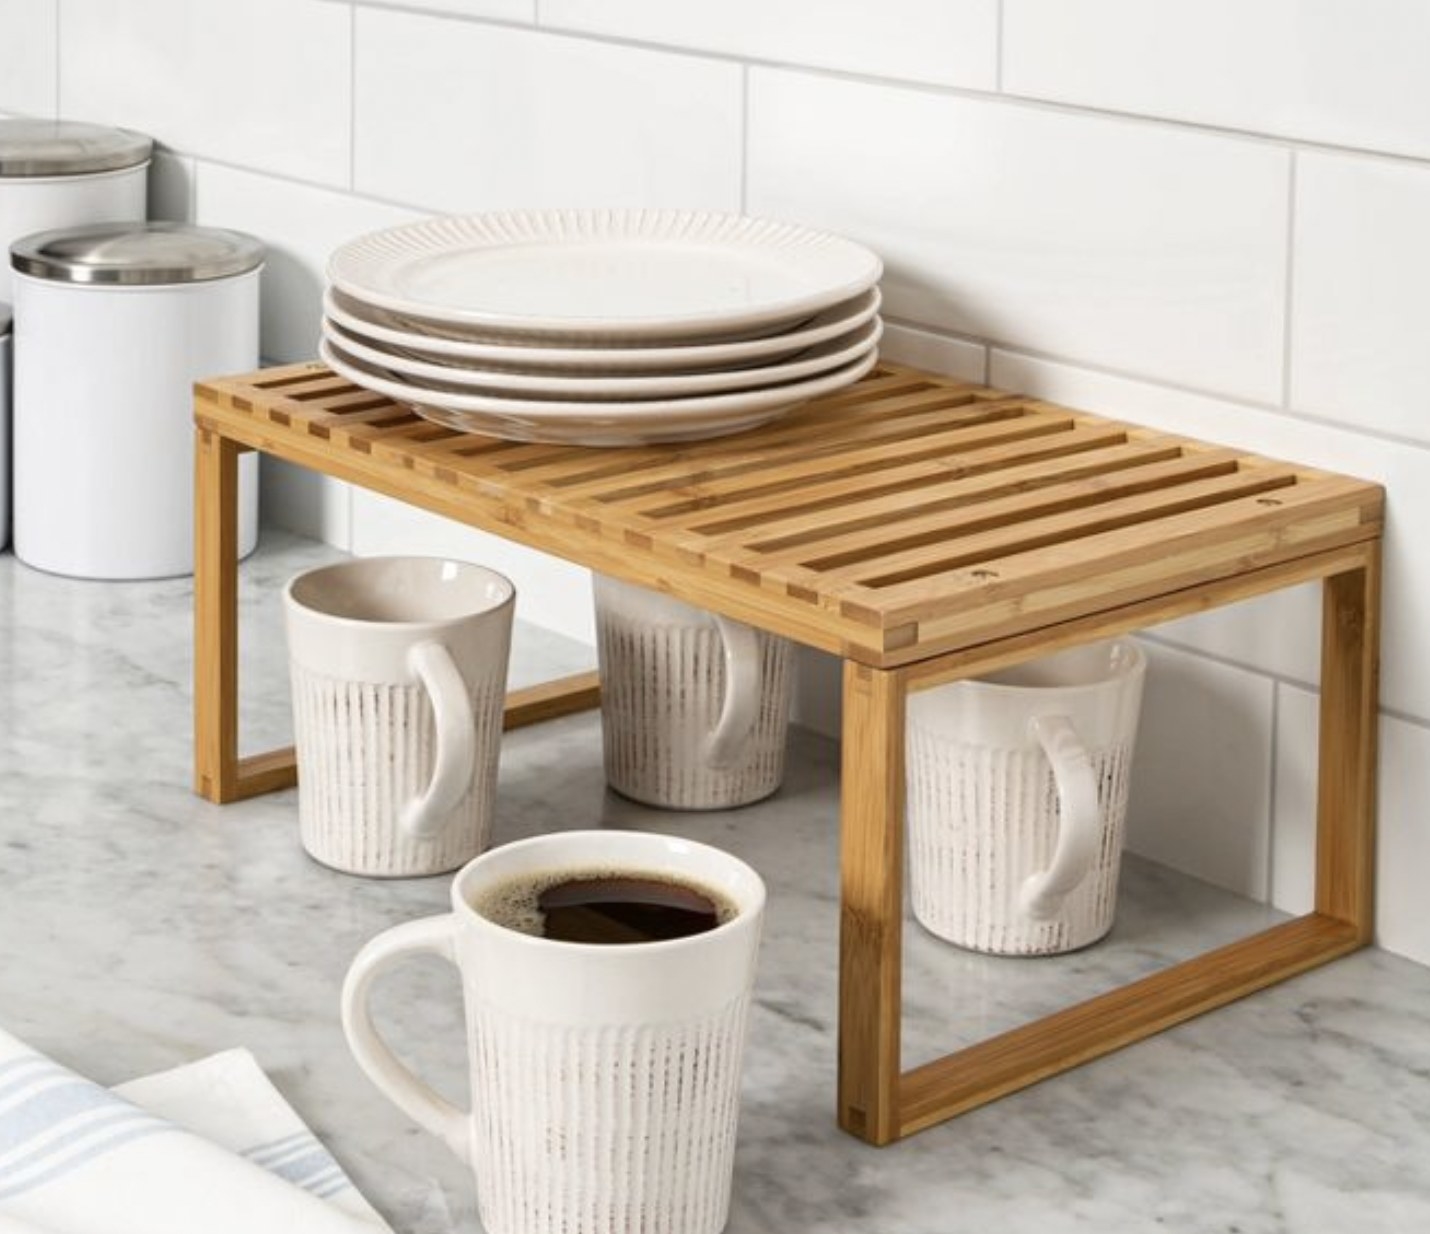 a bamboo shelve in a counter holding plates and hovering over mugs